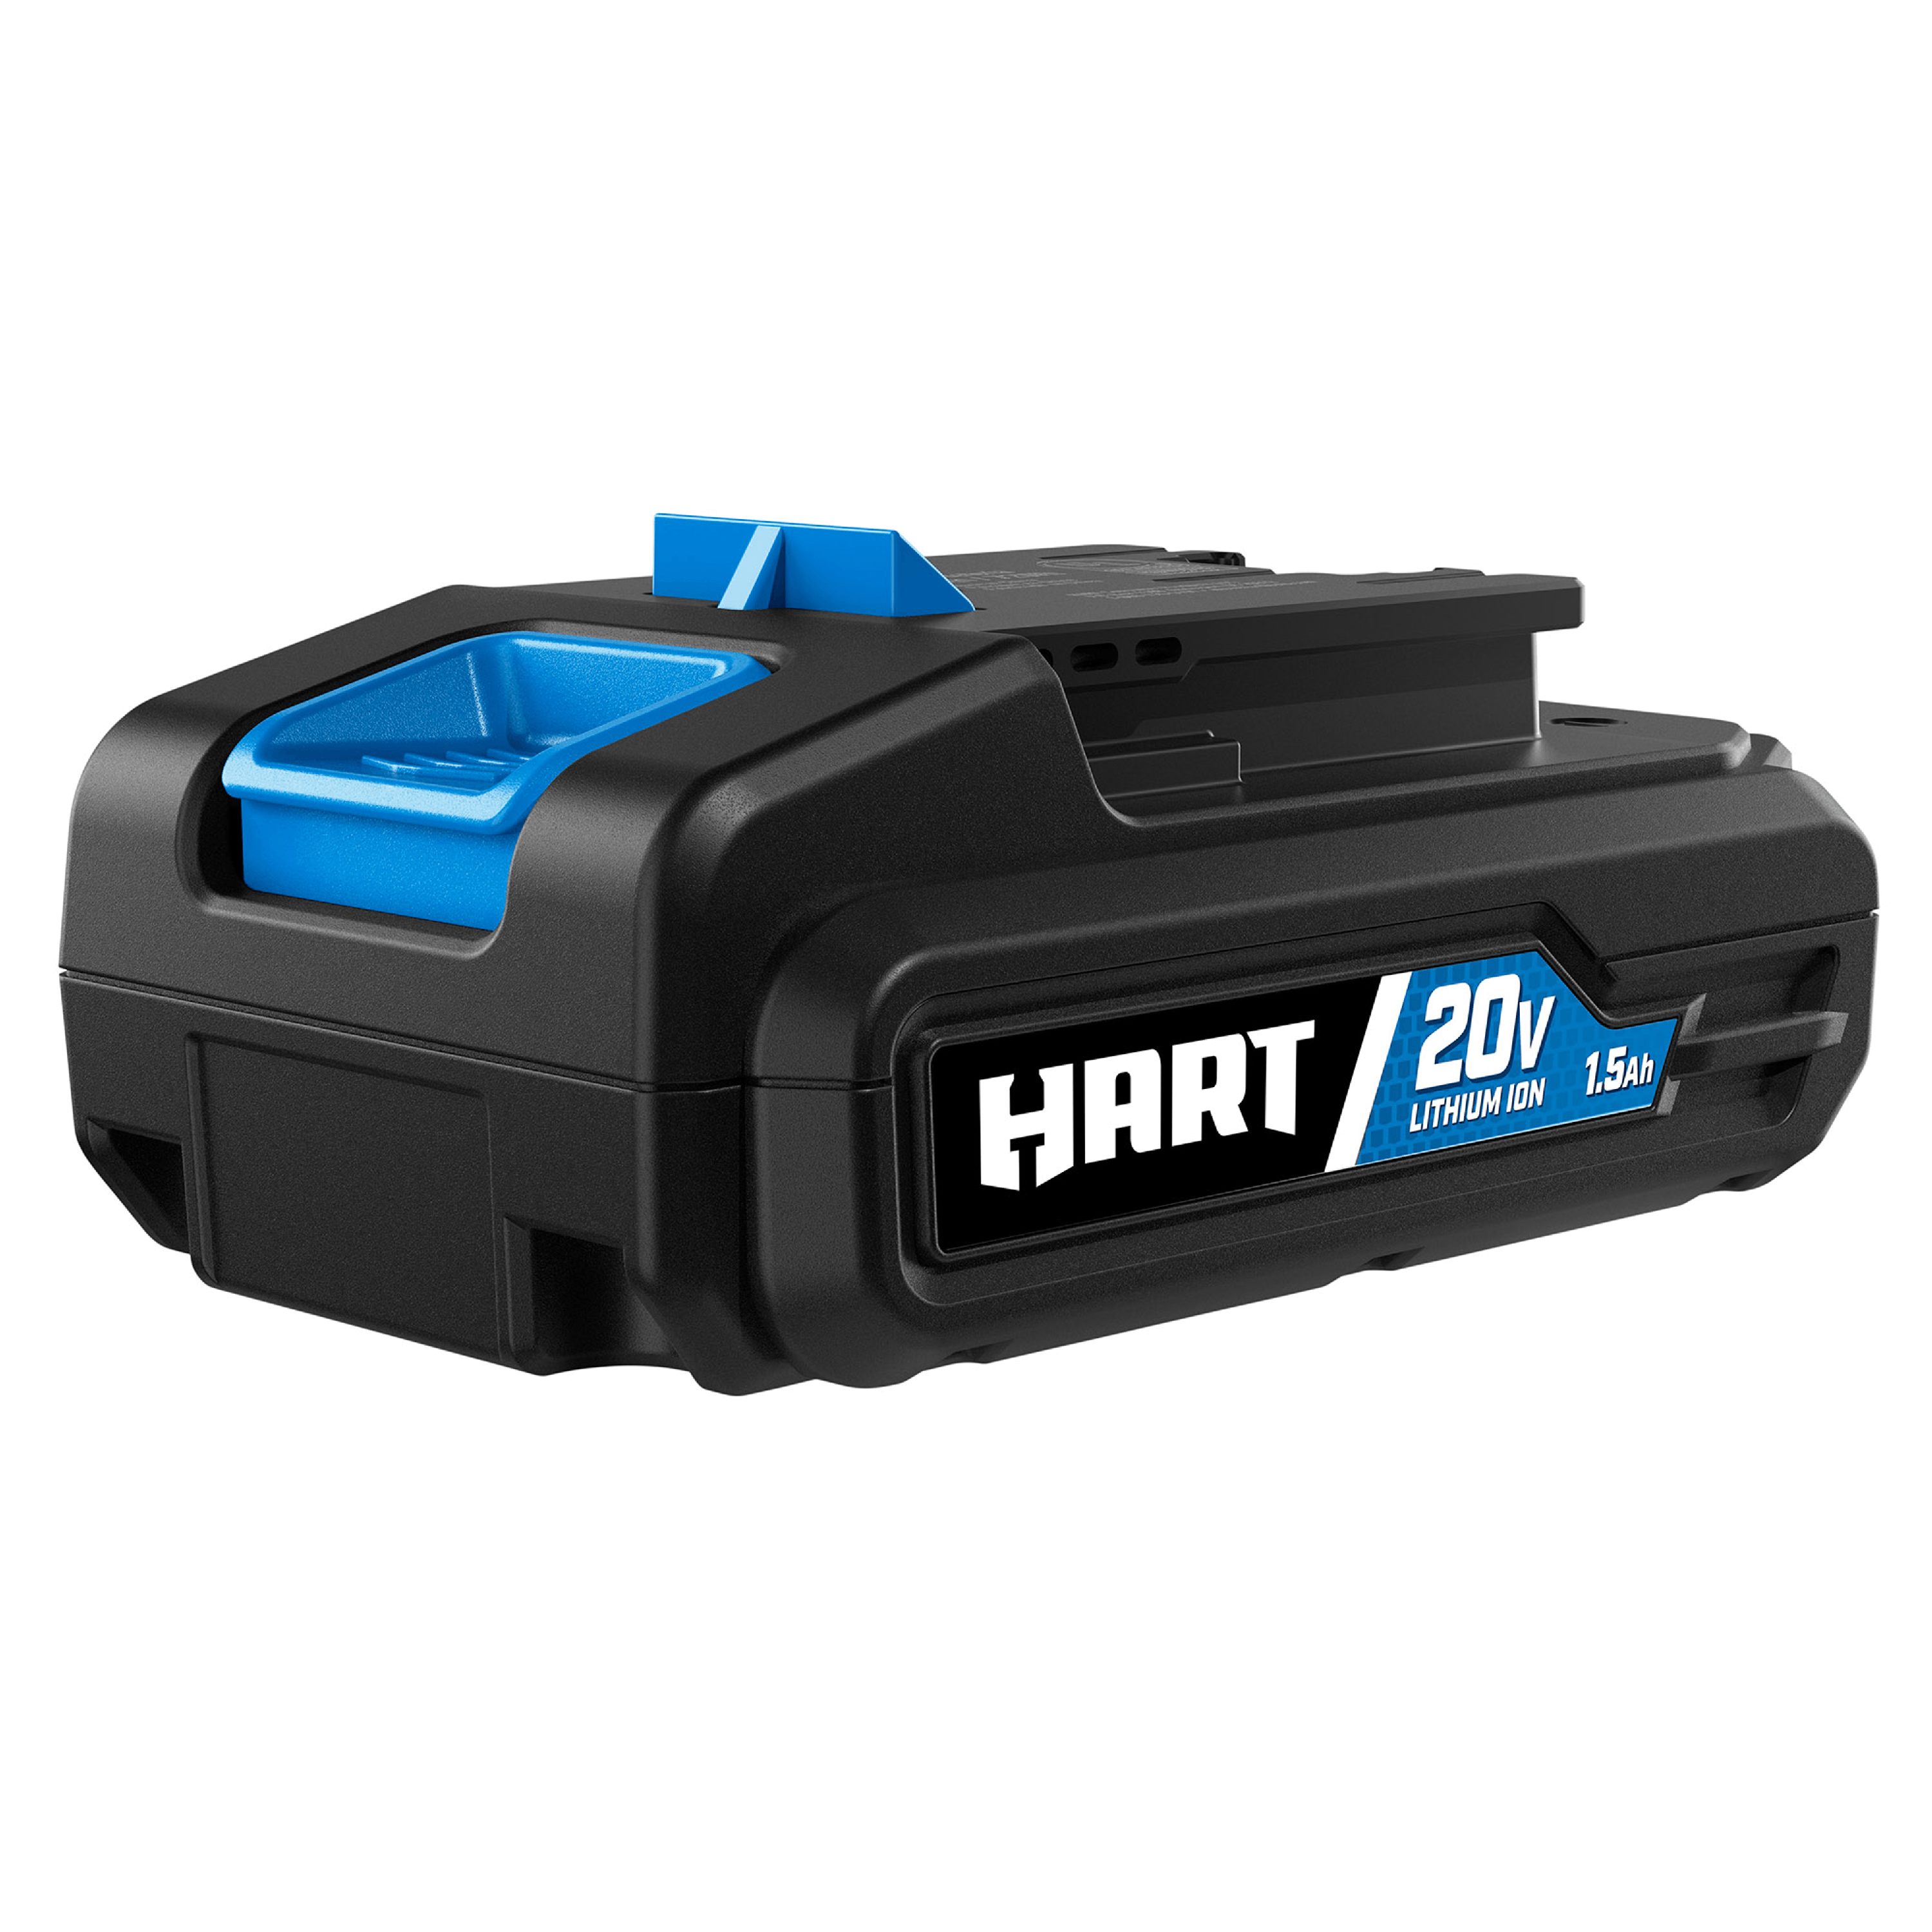 HART 20-Volt 36-Piece Project Kit, Cordless 3/8-inch Drill, Storage Bag, (1) 1.5Ah Lithium-Ion Battery - image 8 of 14